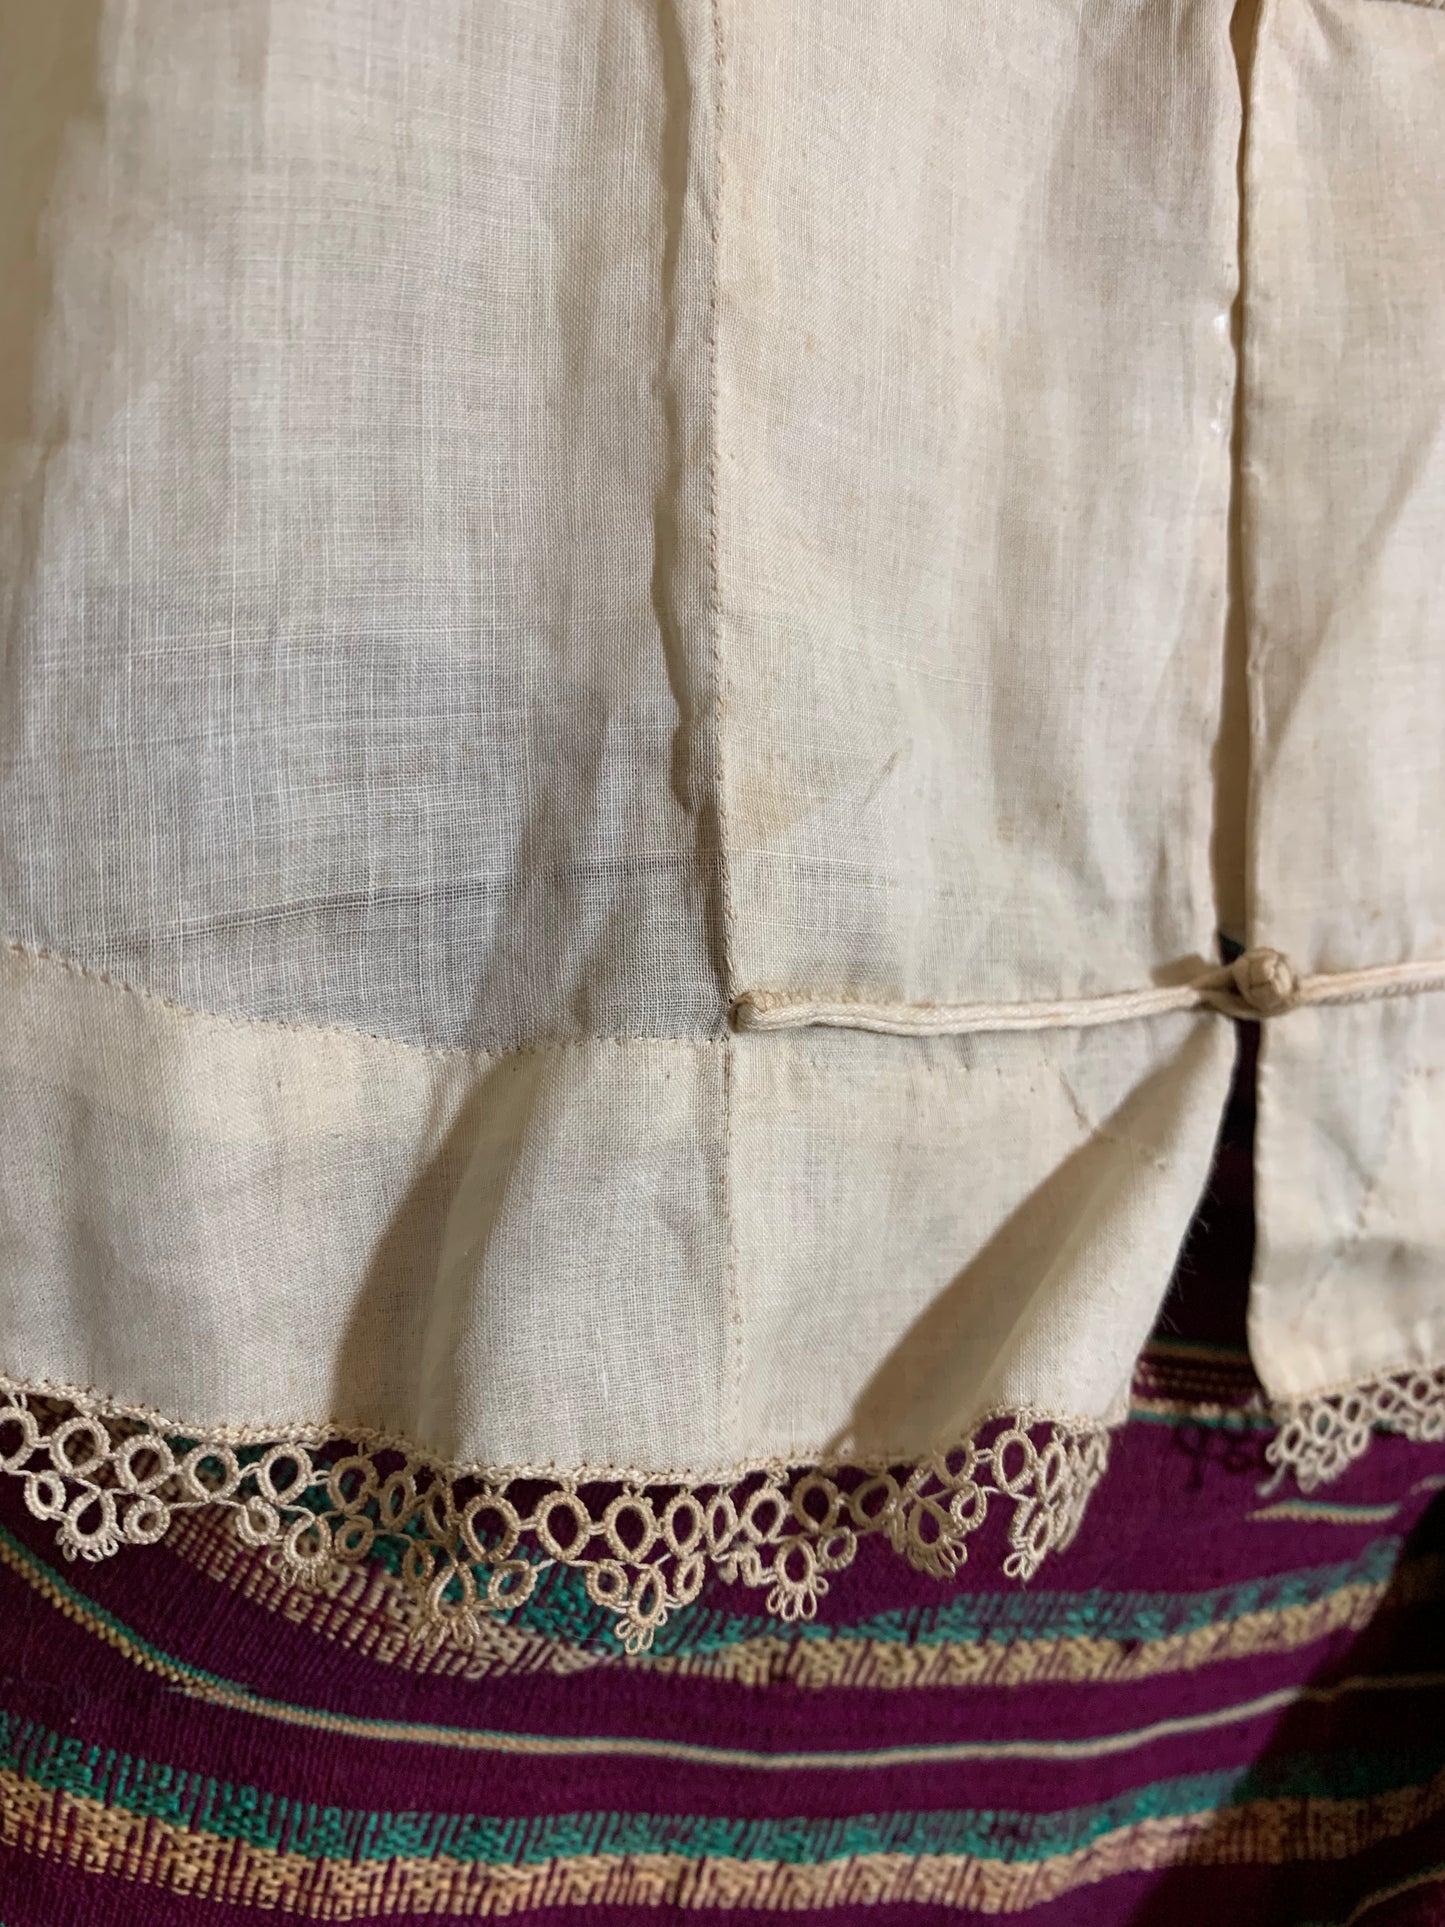 Rare Burmese Purple and Gold Striped Wool Bridal Skirt with 2 Bodices and Ornate Shoes circa 1890s